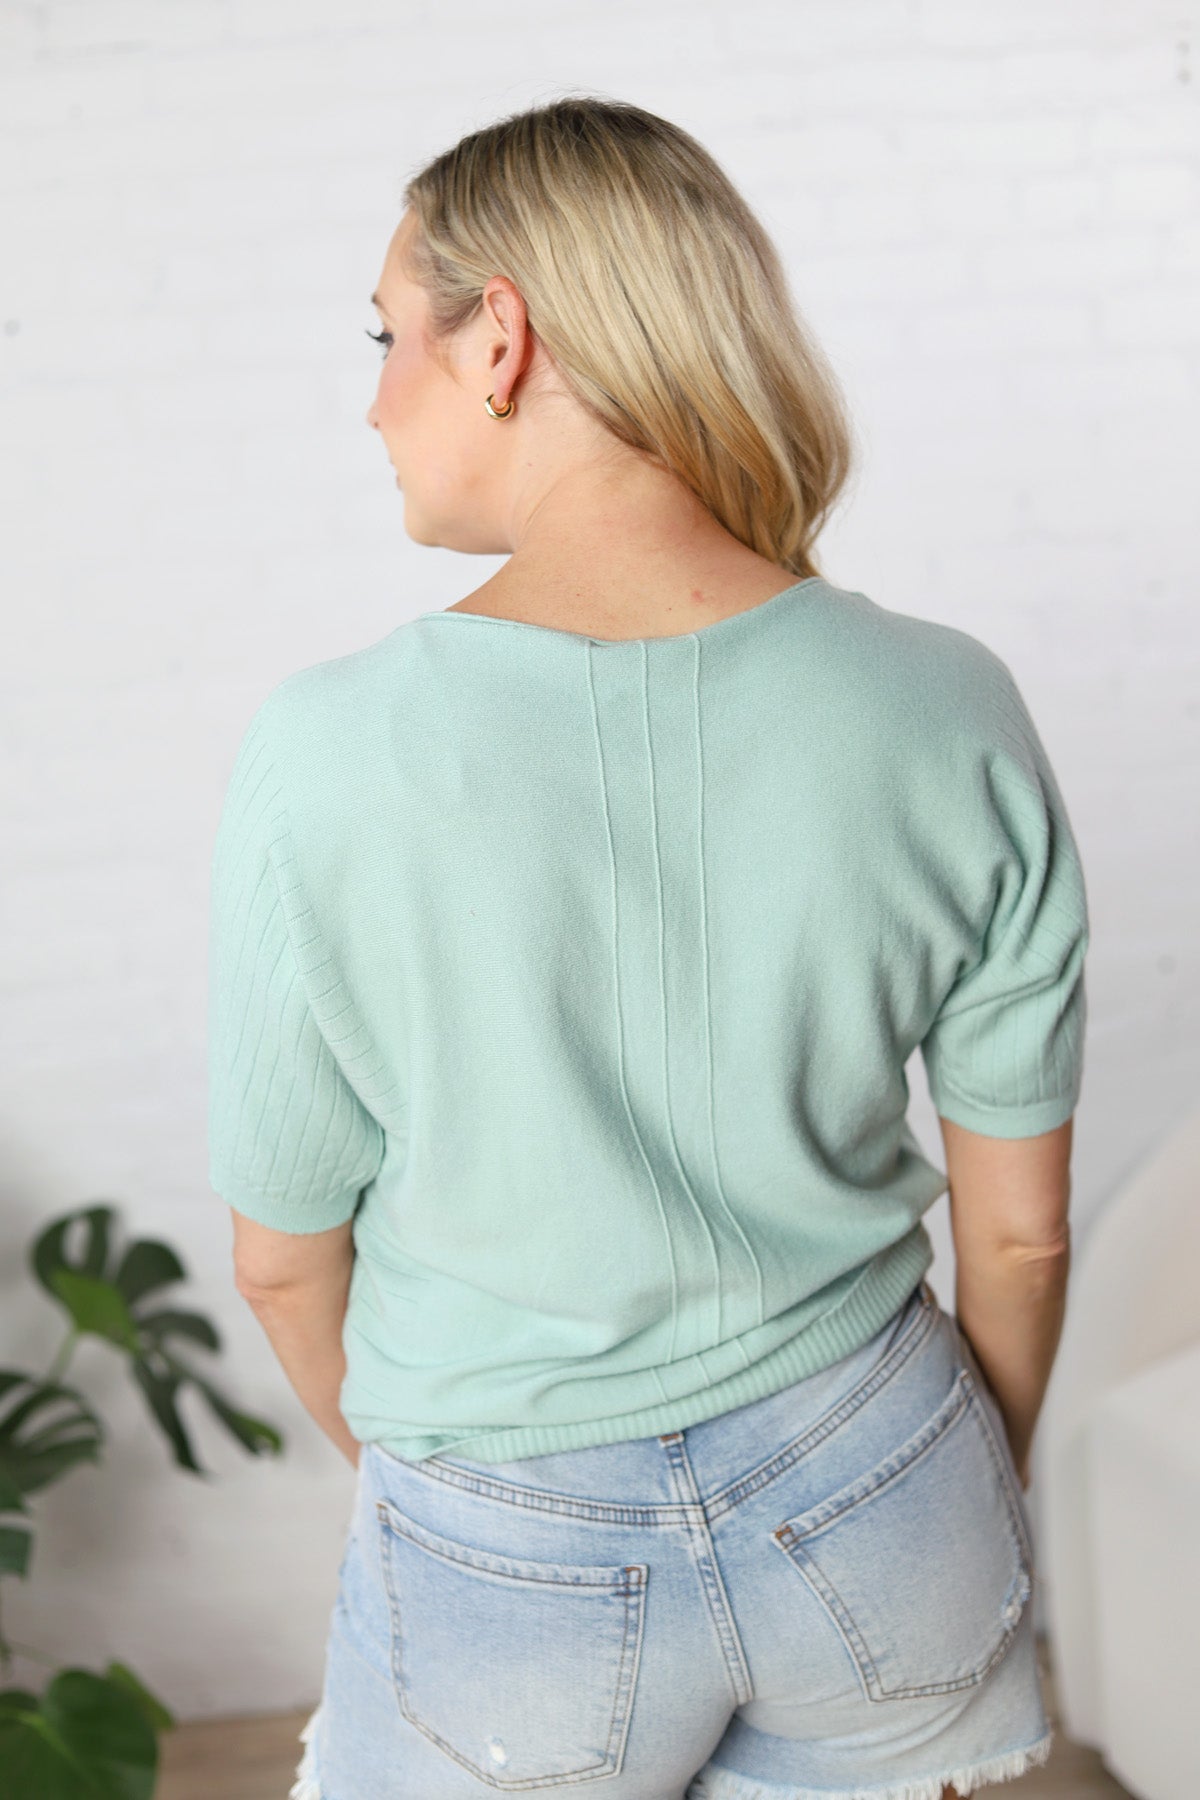 Anders Mixed Texture Soft Dolman Sweater Top - Jade